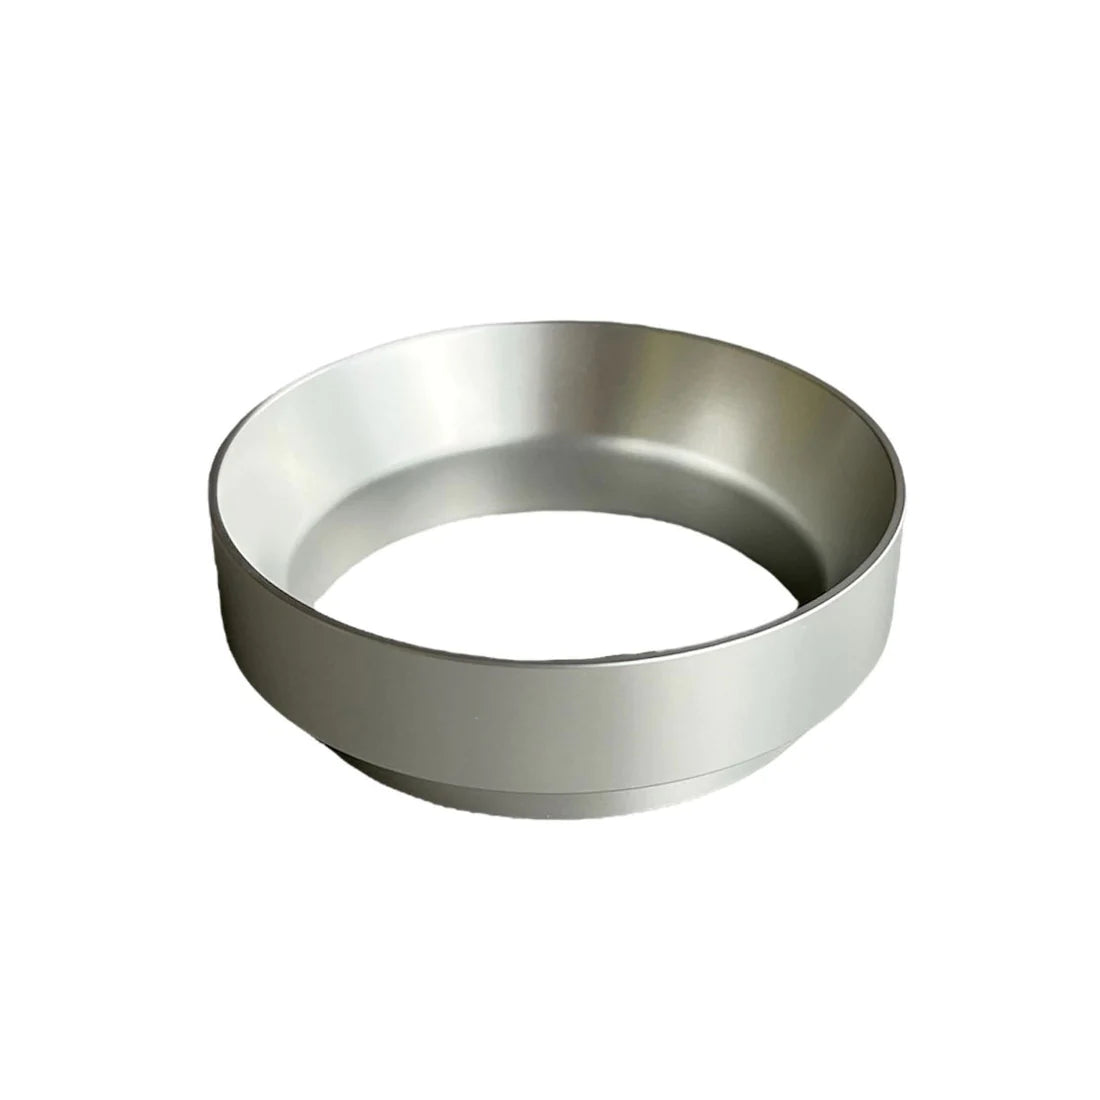 MAGNETIC DOSING RING FOR ESPRESSO - 58MM